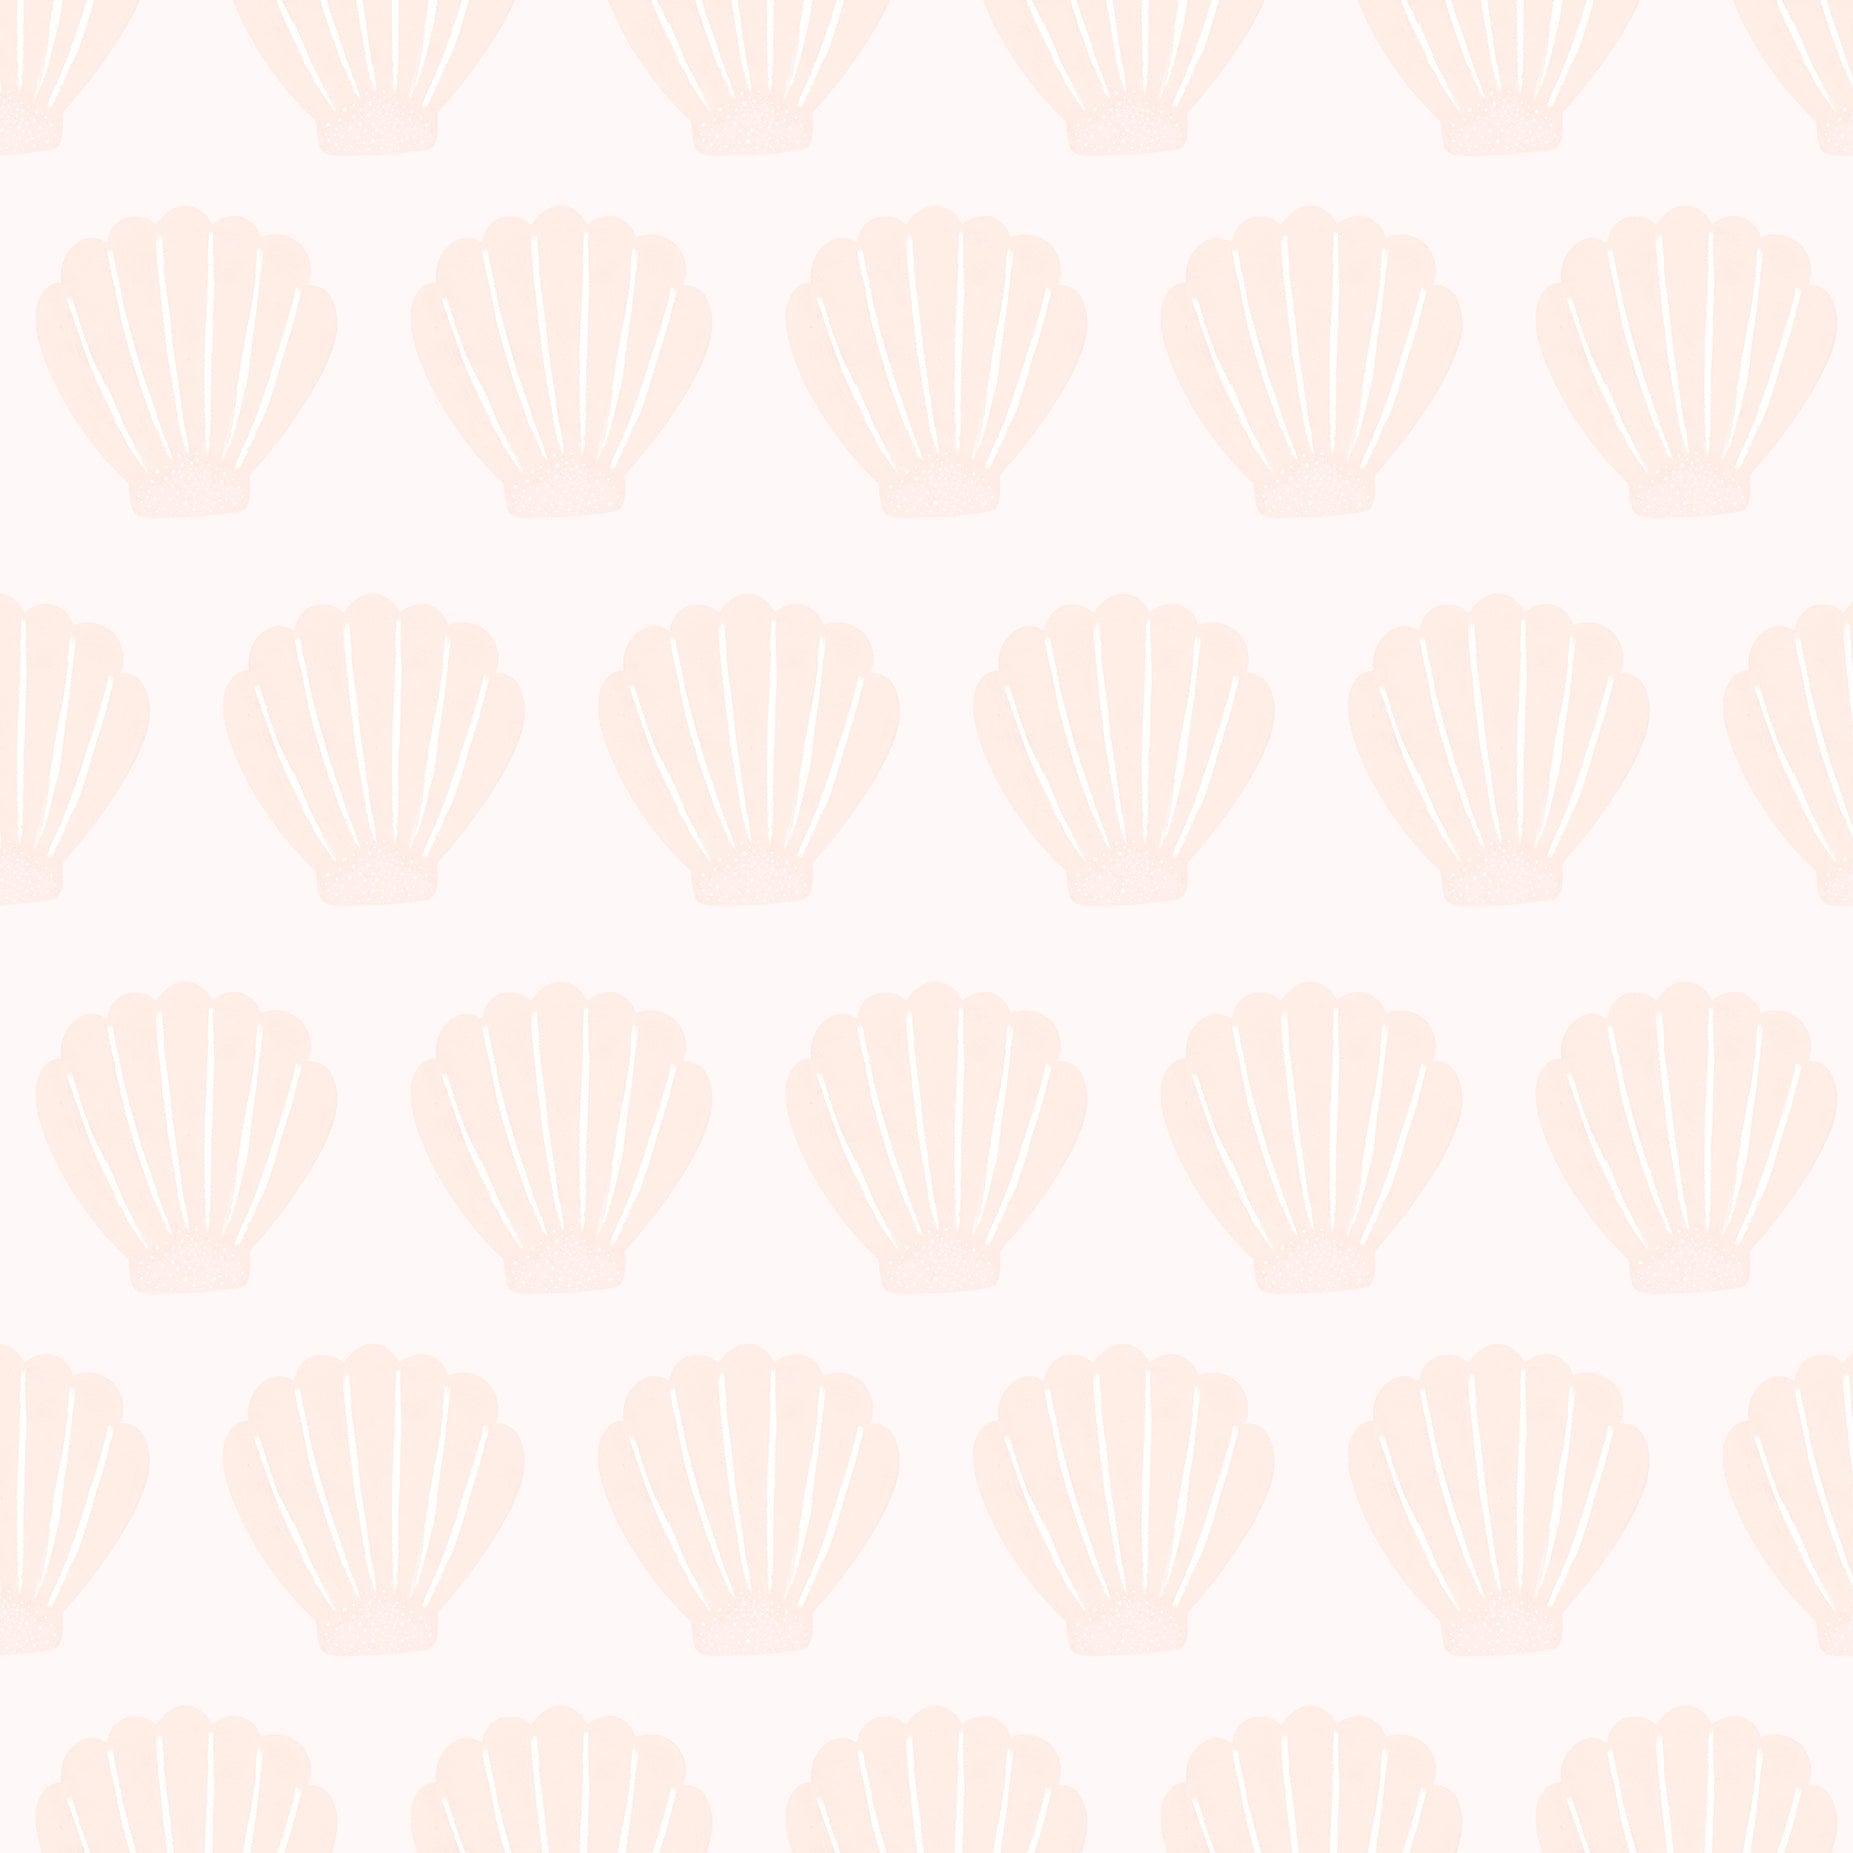 Close-up of the Mermaid Sea Shell wallpaper pattern showing seamless shell designs in soft pink on a light background. Ideal for adding a gentle, oceanic touch to any room.